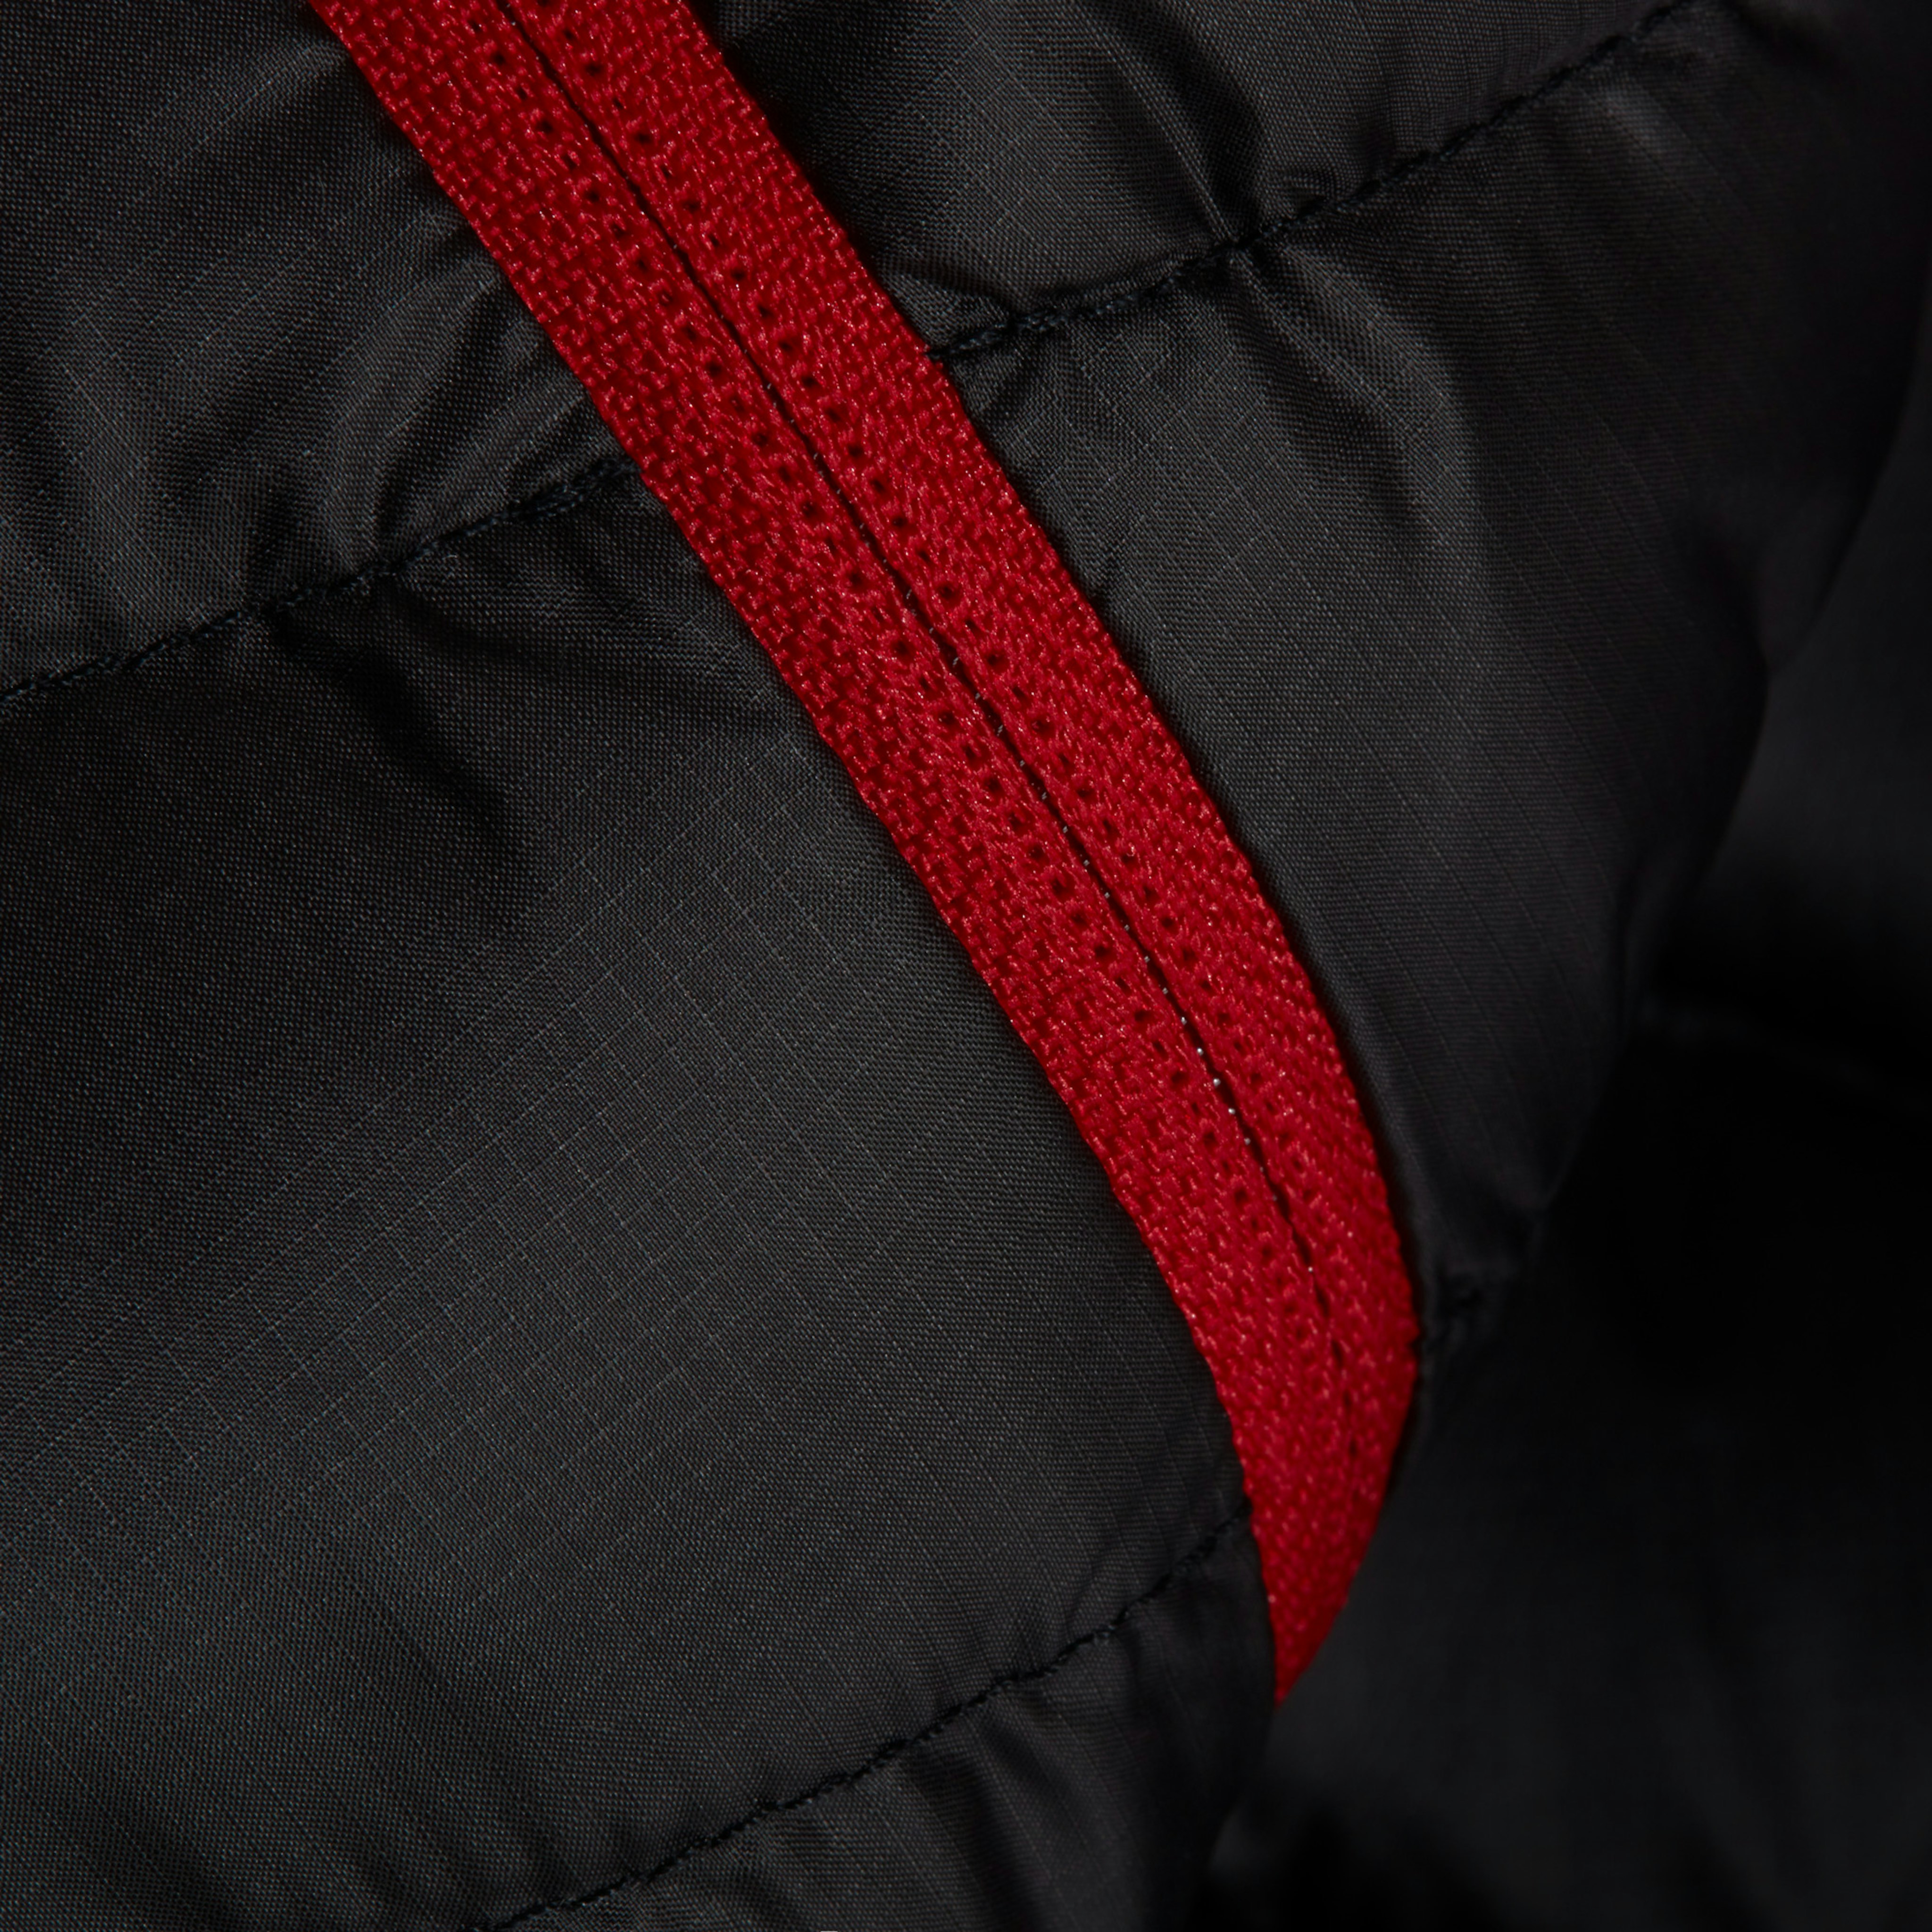 Black fabric with red zipper 